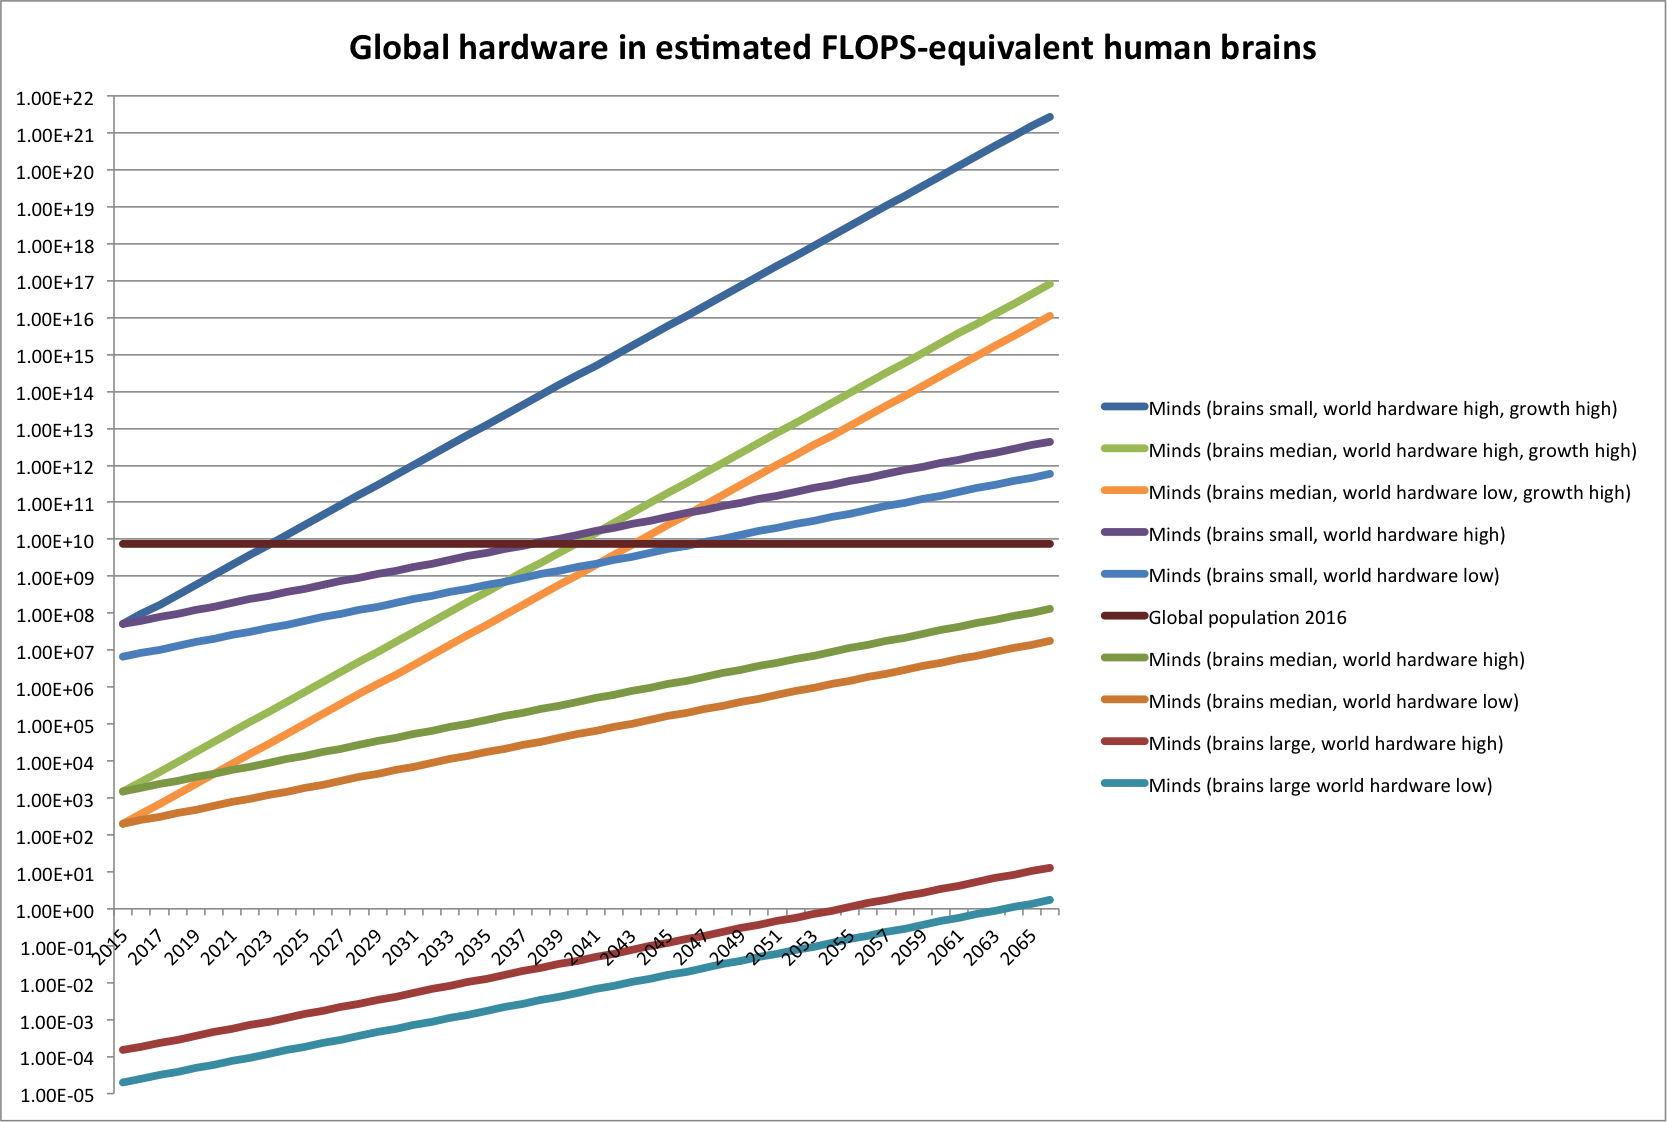 Figure: Projected number of human brains equivalent 